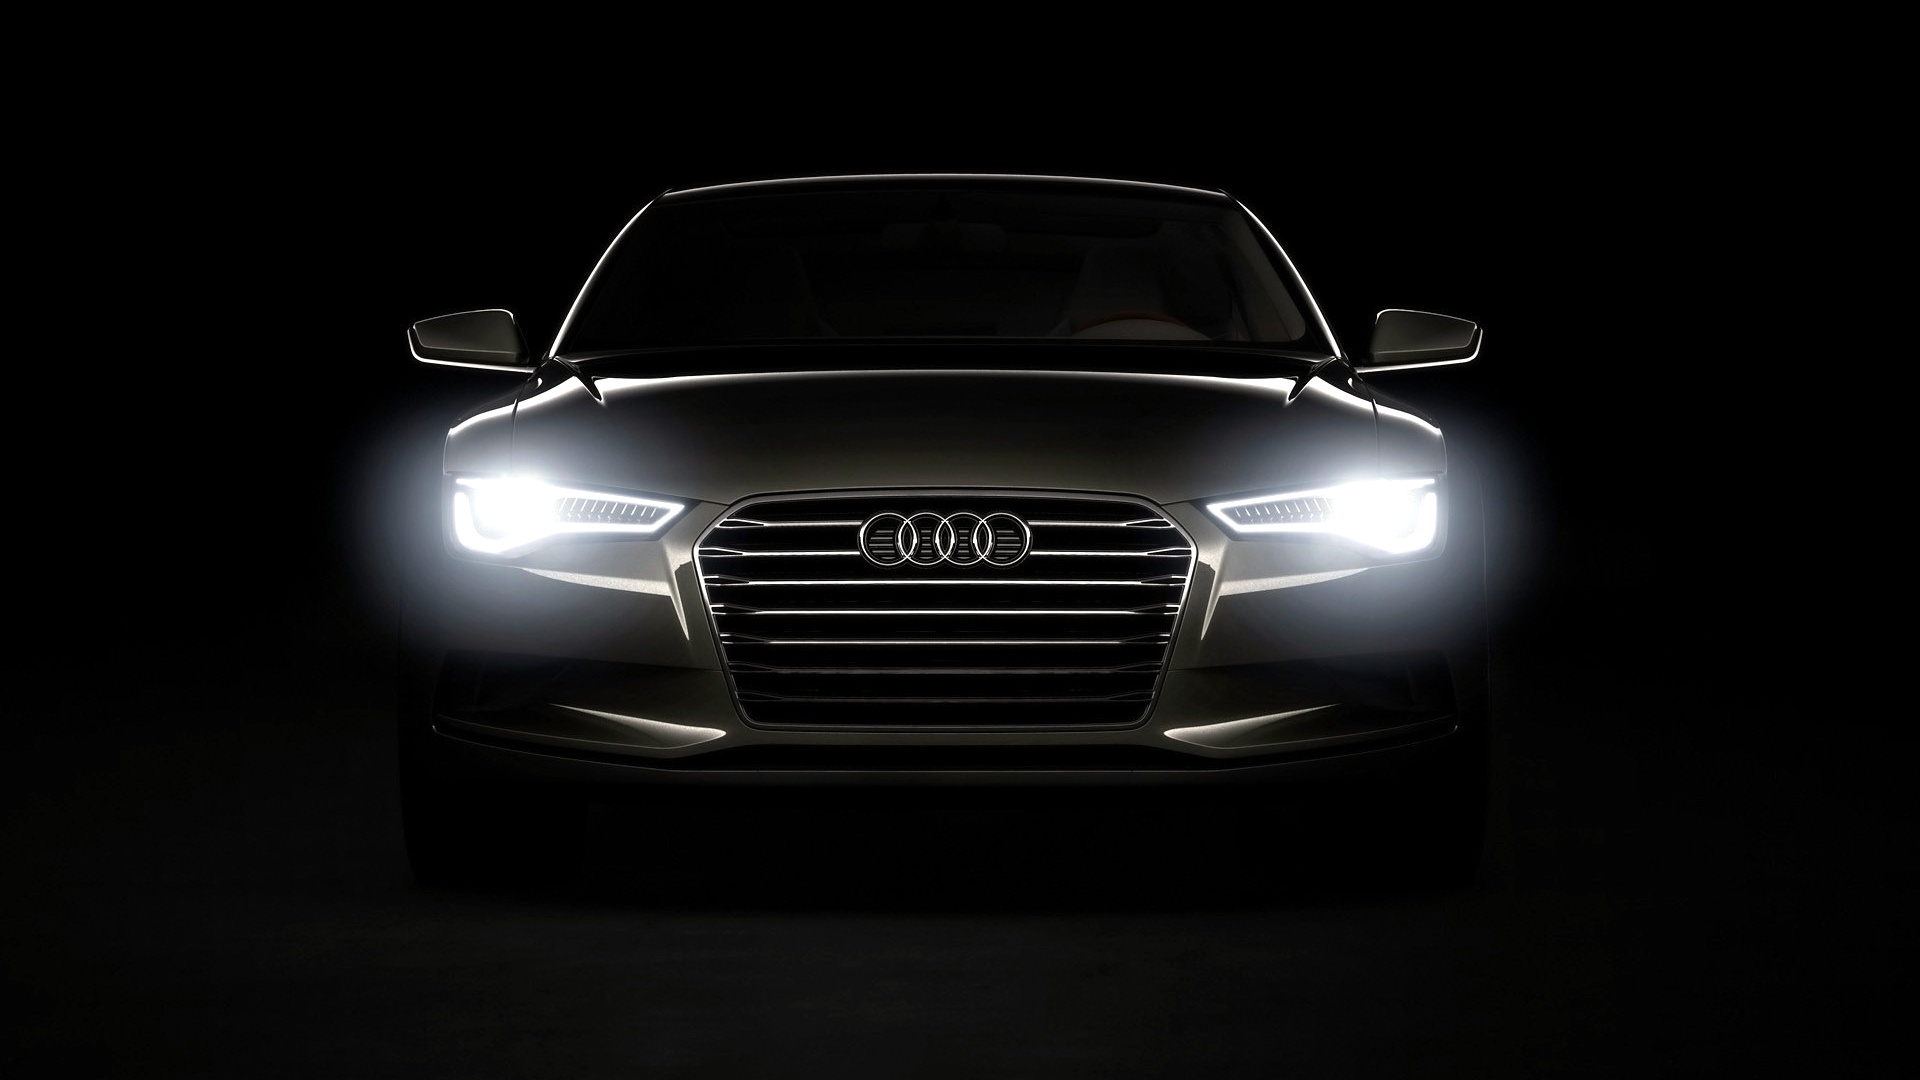 Audi Hd wallpapers backgrounds your desktop Audi cars wallpapers are